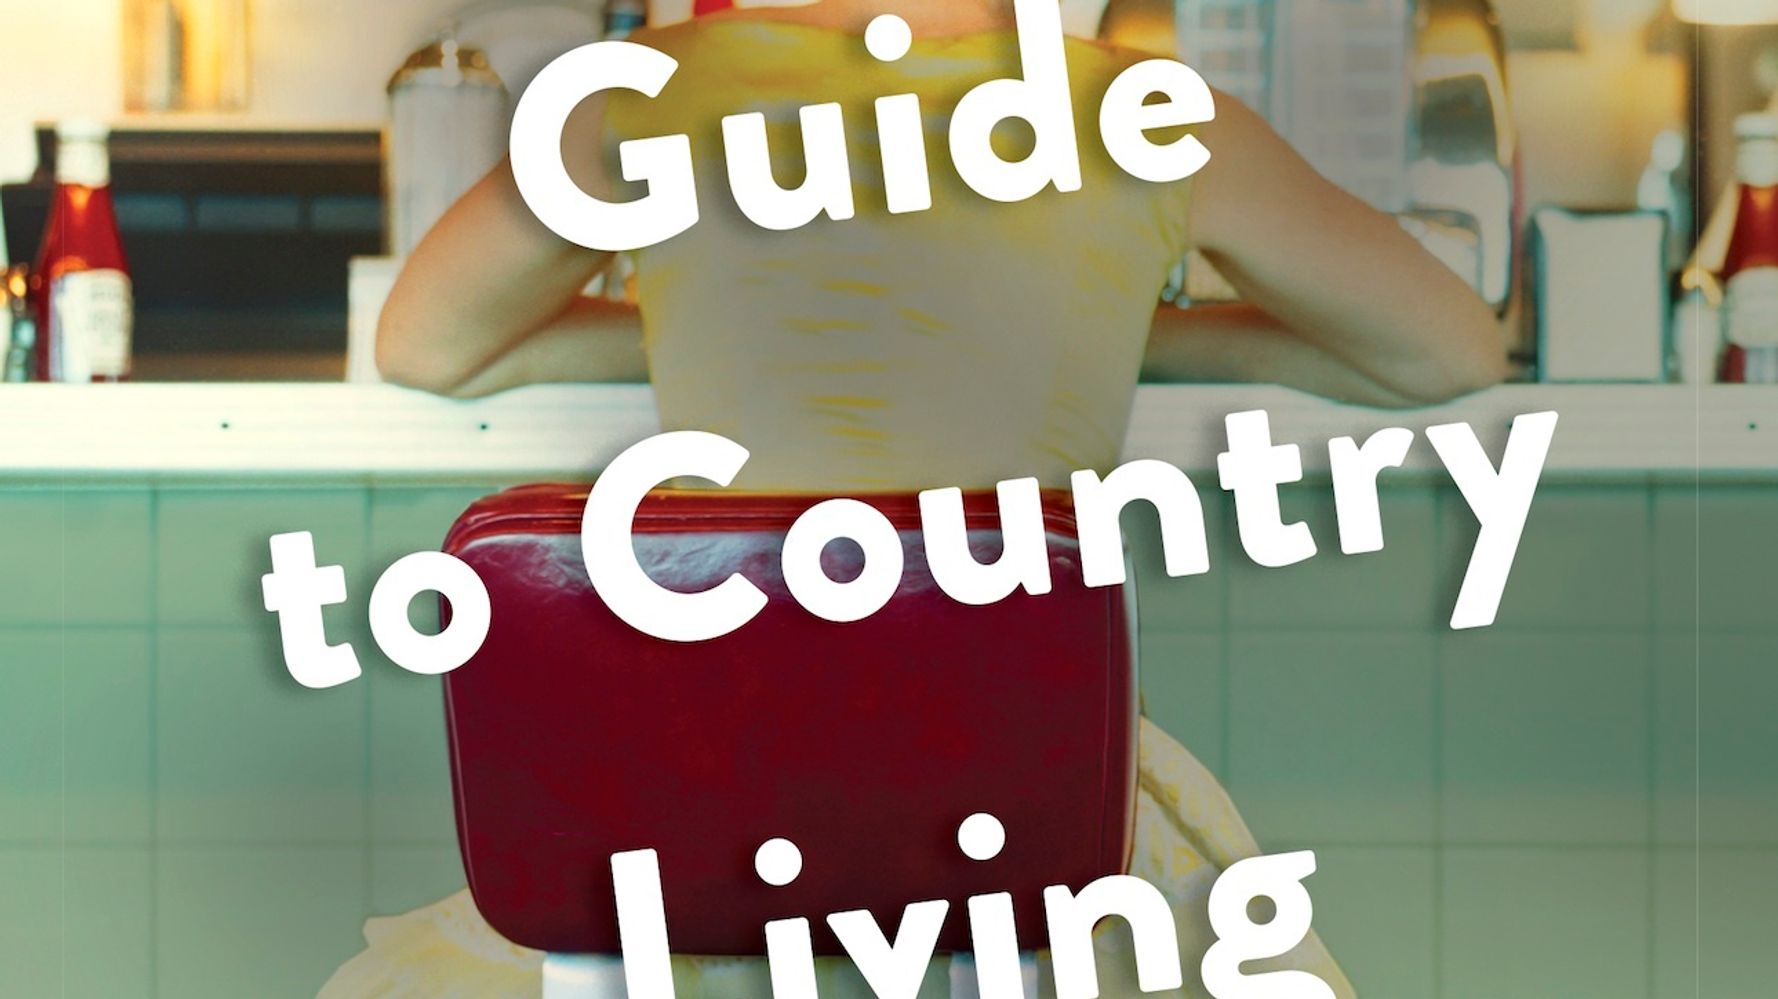 The City Baker's Guide to Country Living Book Club Kit - Peanut